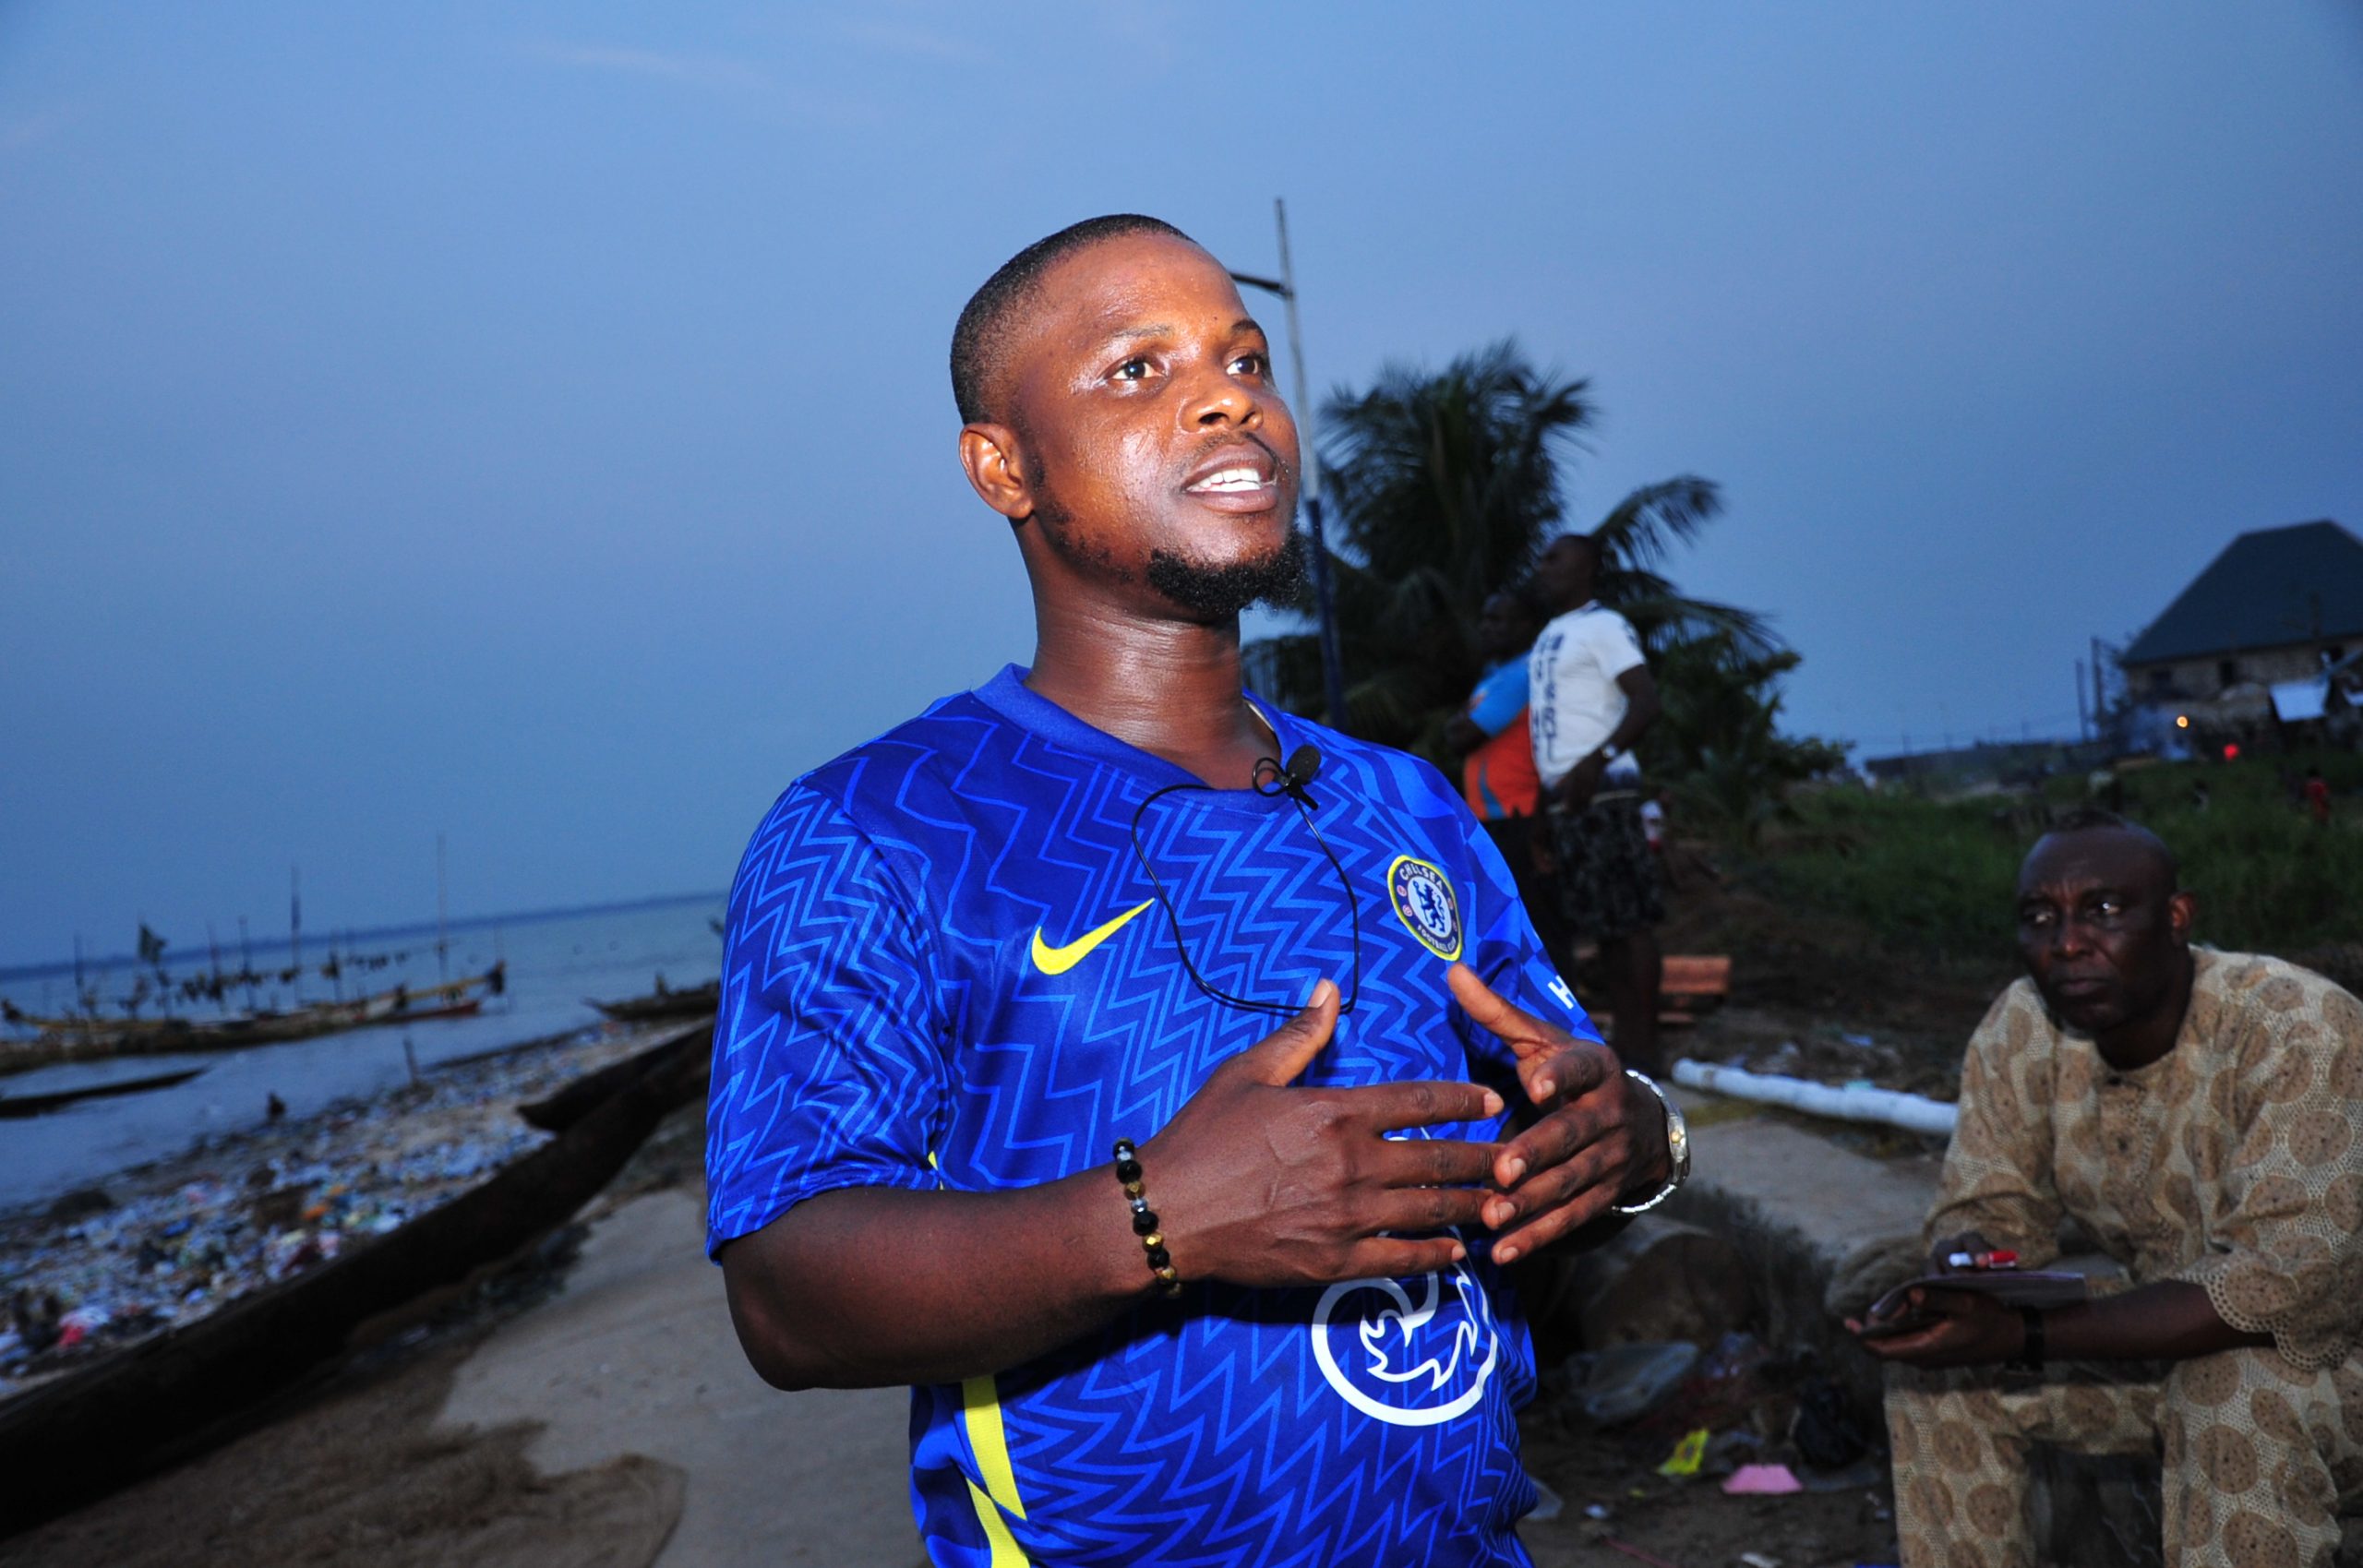 LOOKING BEYOND OIL: An Indepth Look at Ogulagha Fishing Hub